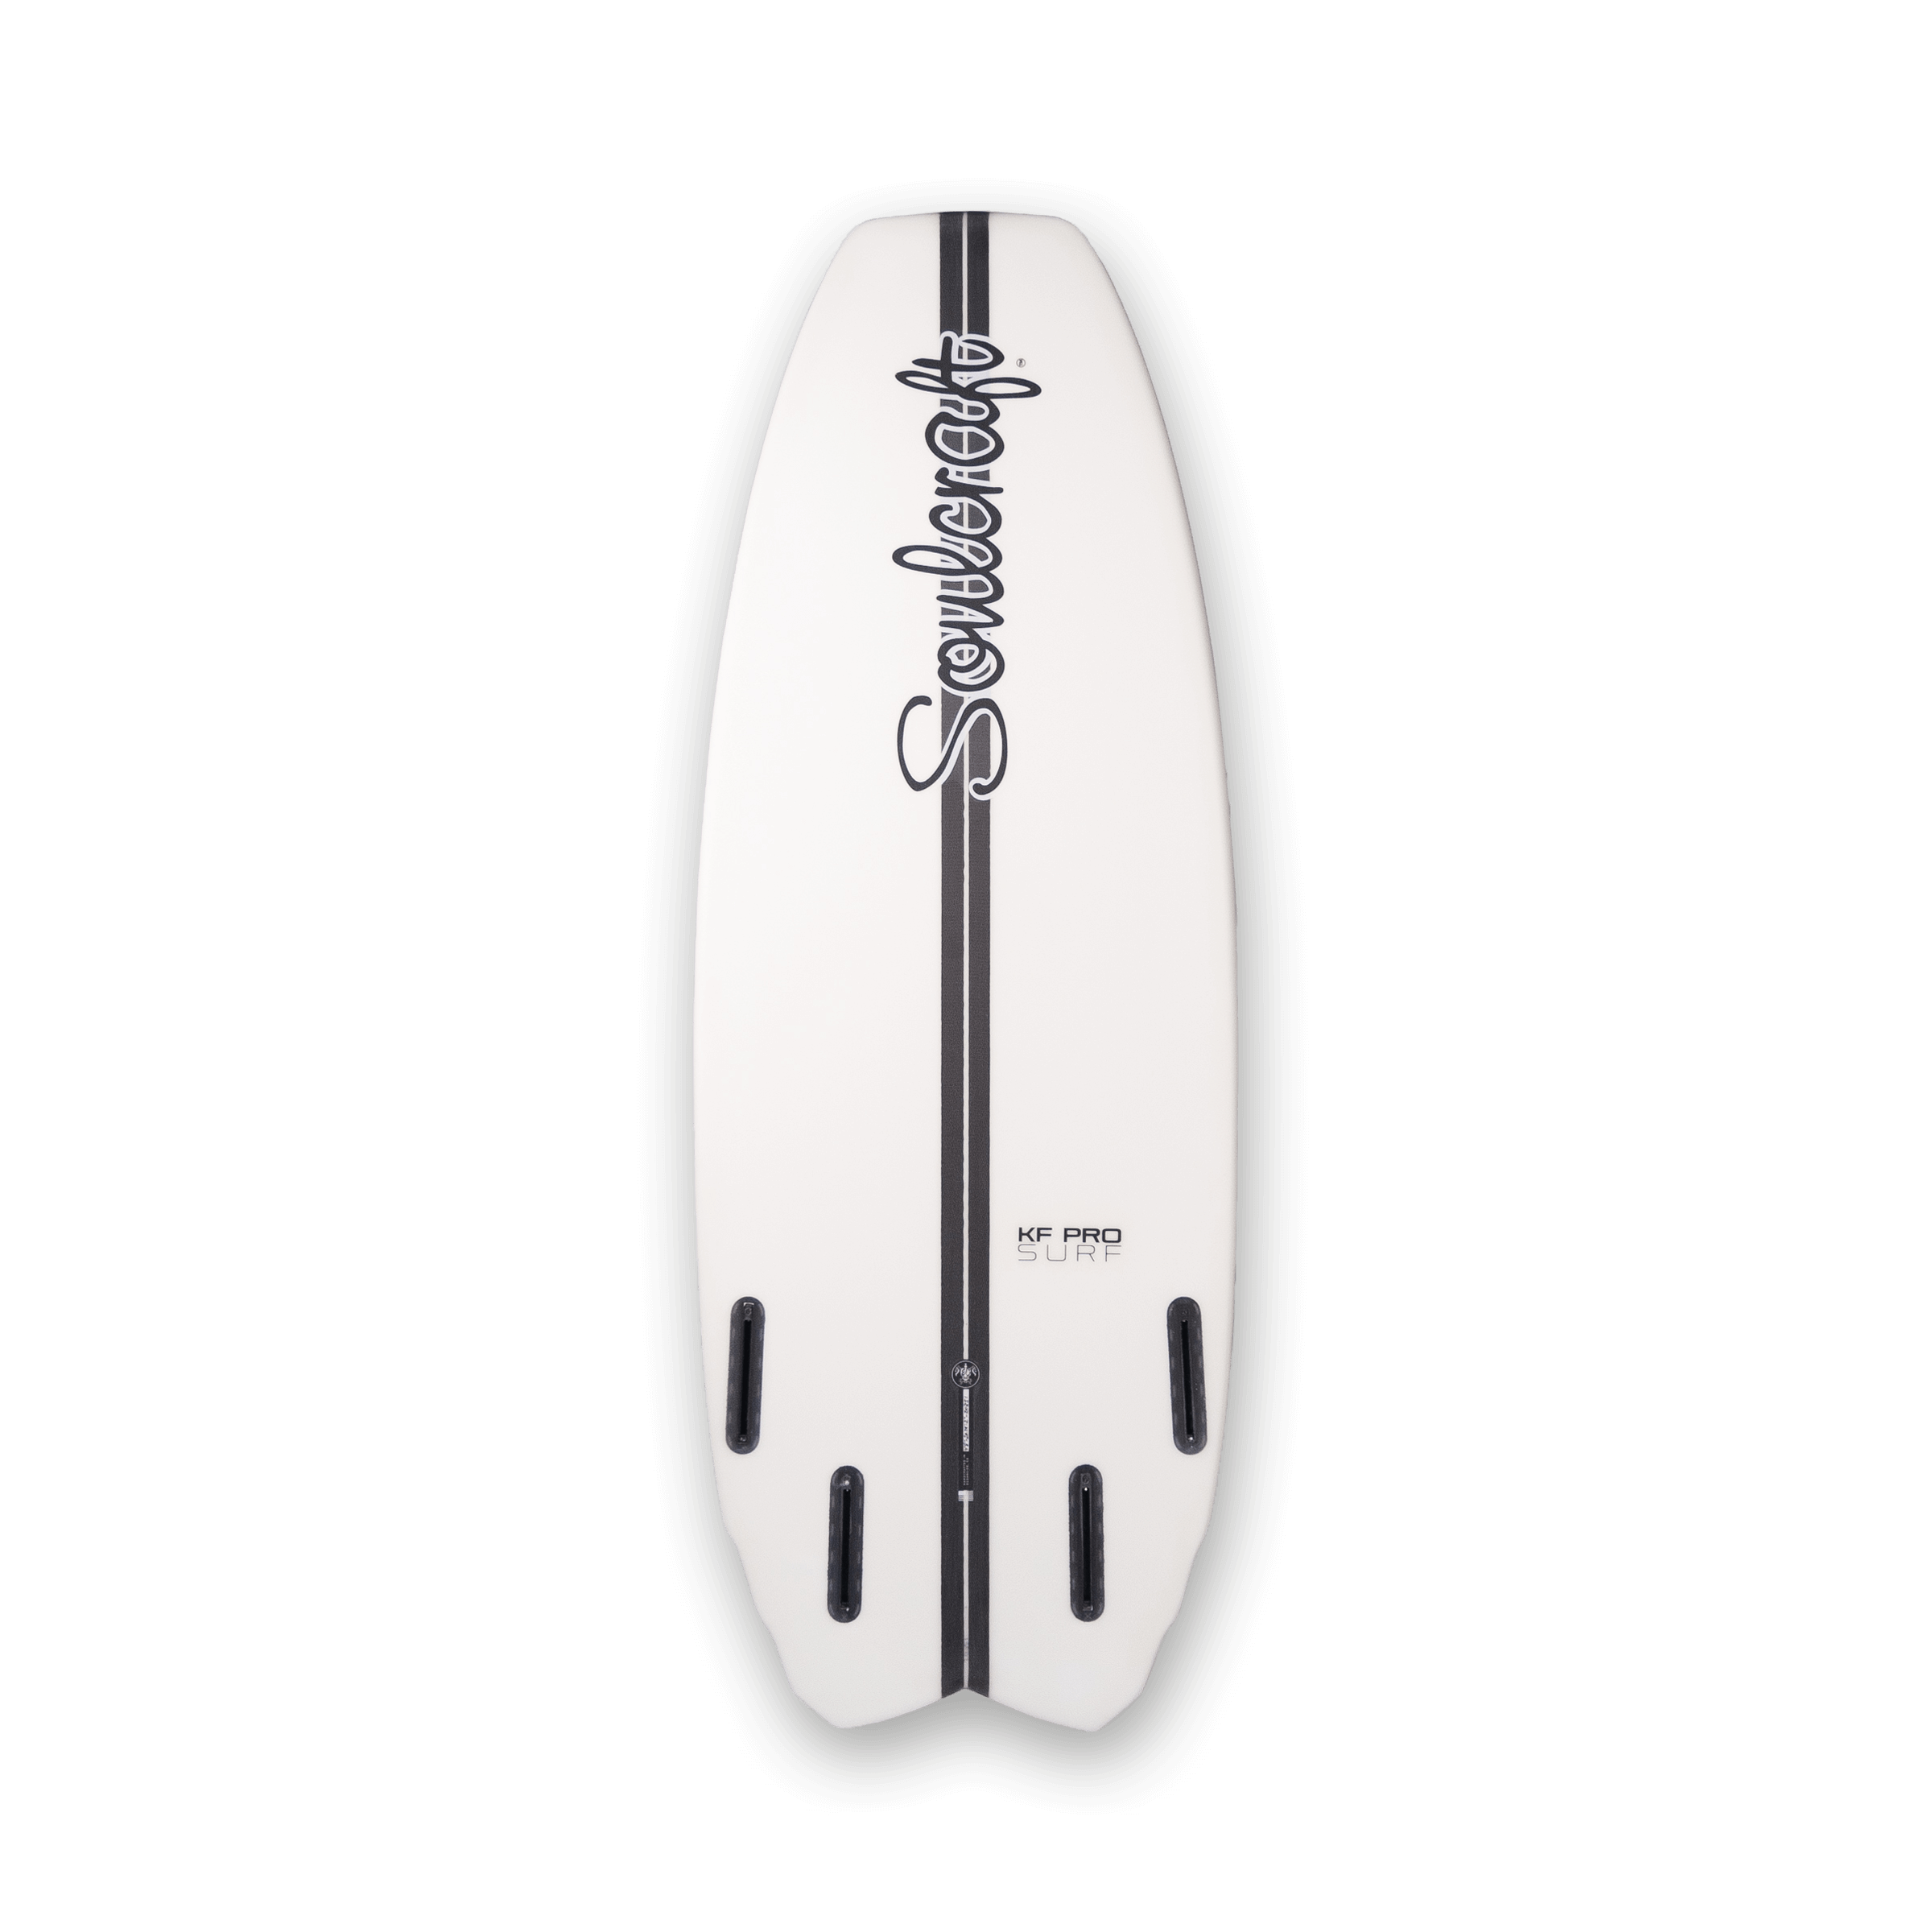 Soulcraft KF Pro Surf Wakesurf Board by Soulcraft is renowned in the industry for its efficient and high-performance white surfboard. Against a sleek black background, this surfboard stands out with its exceptional design and craftsmanship.